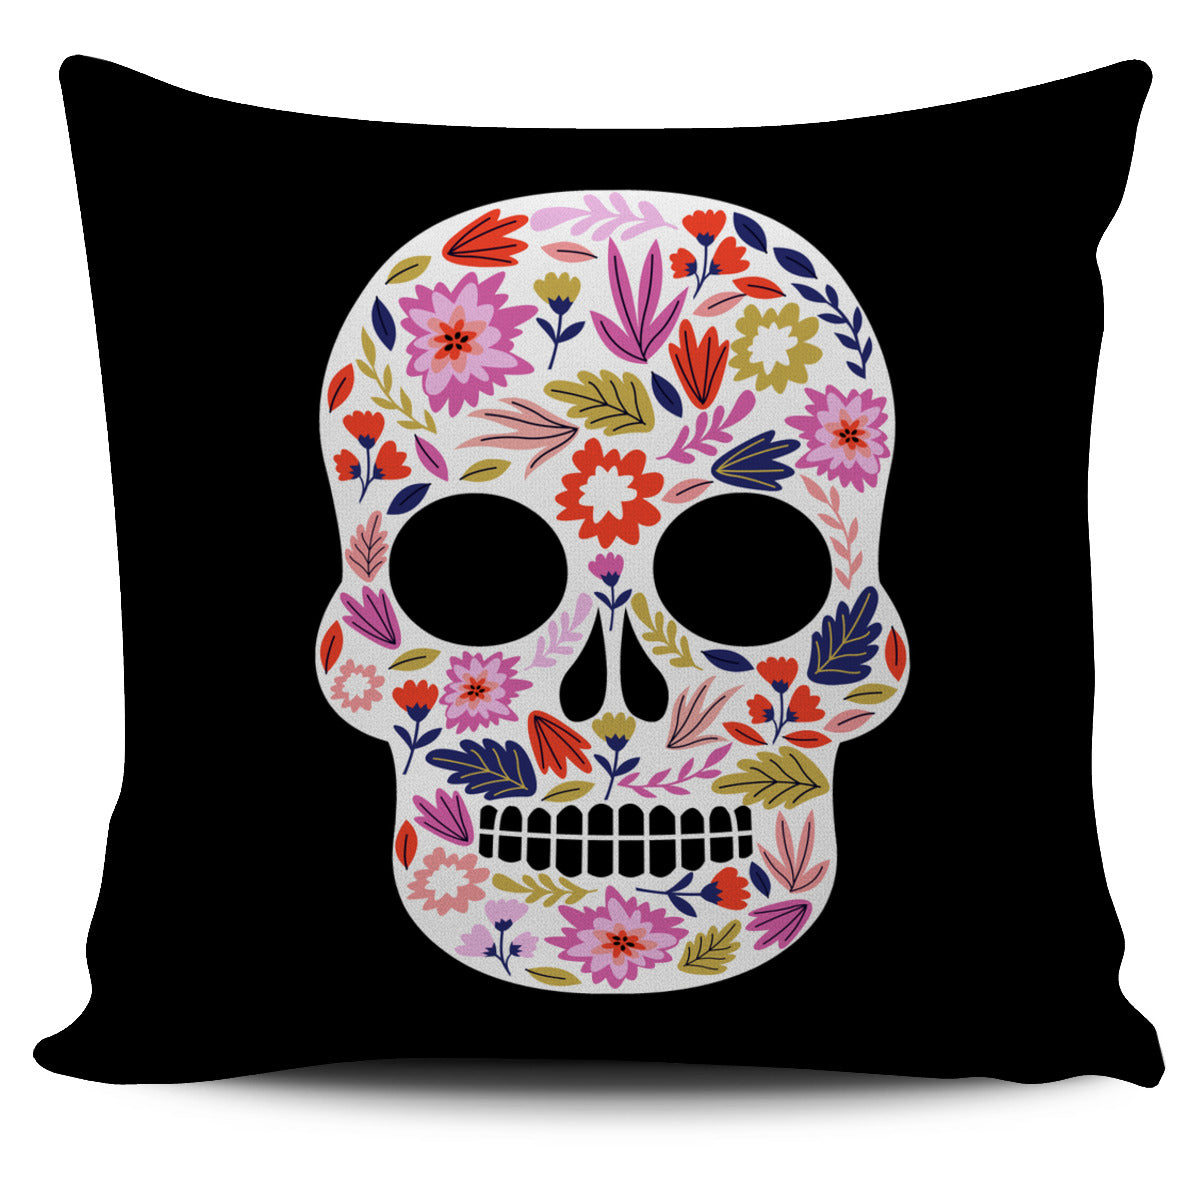 Floral Skull Halloween Pillow Cover